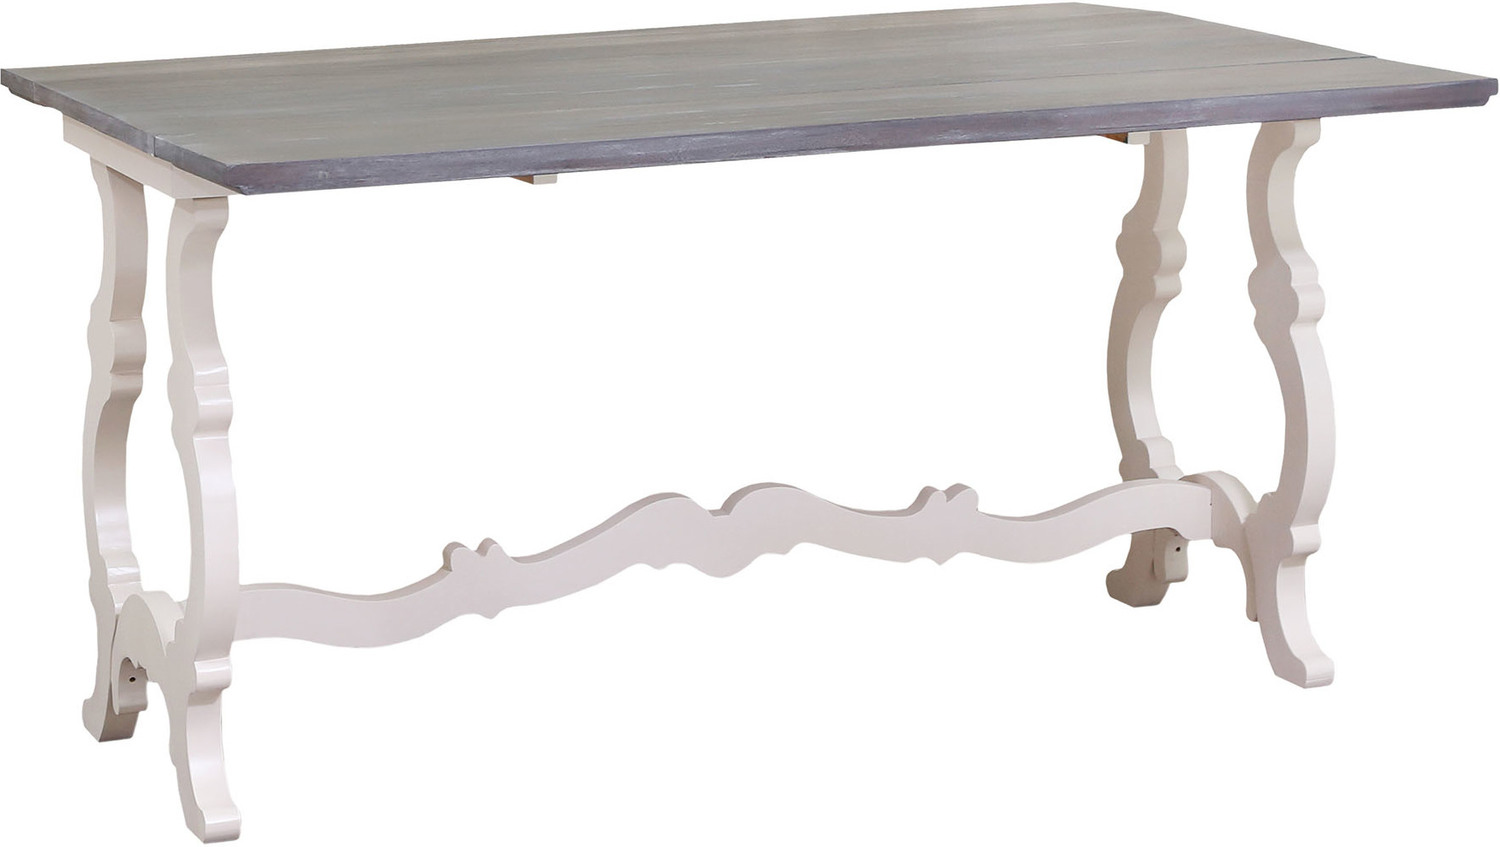 Stein World Console Table / Desk Accent Tables Indian White, Antique Smoke Transitional